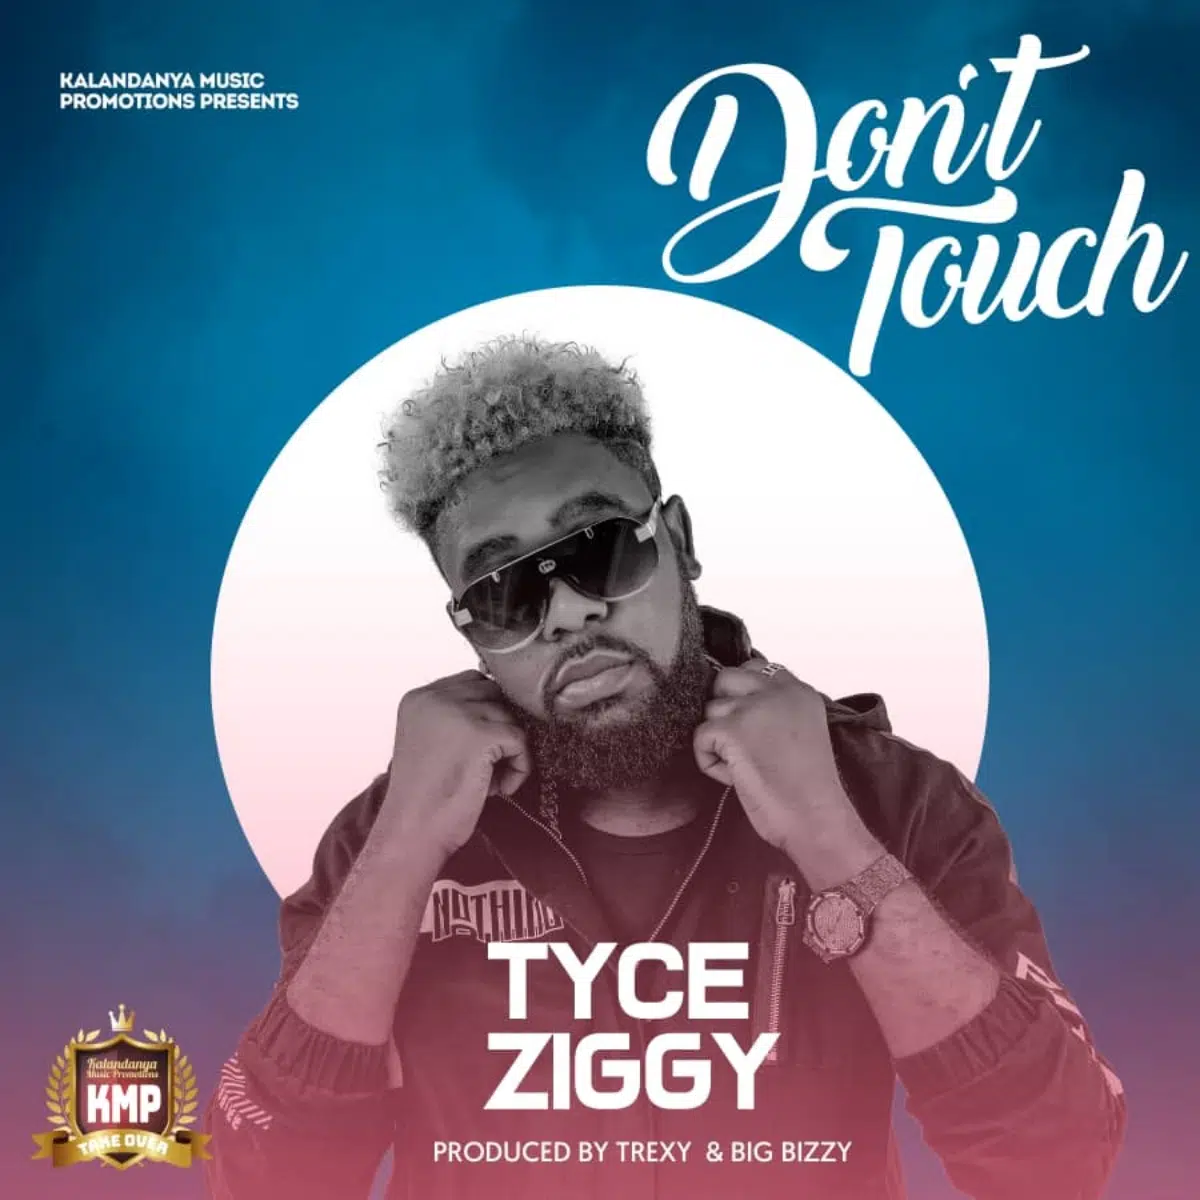 DOWNLOAD: Tyce Ziggy – “Don’t Touch” Mp3